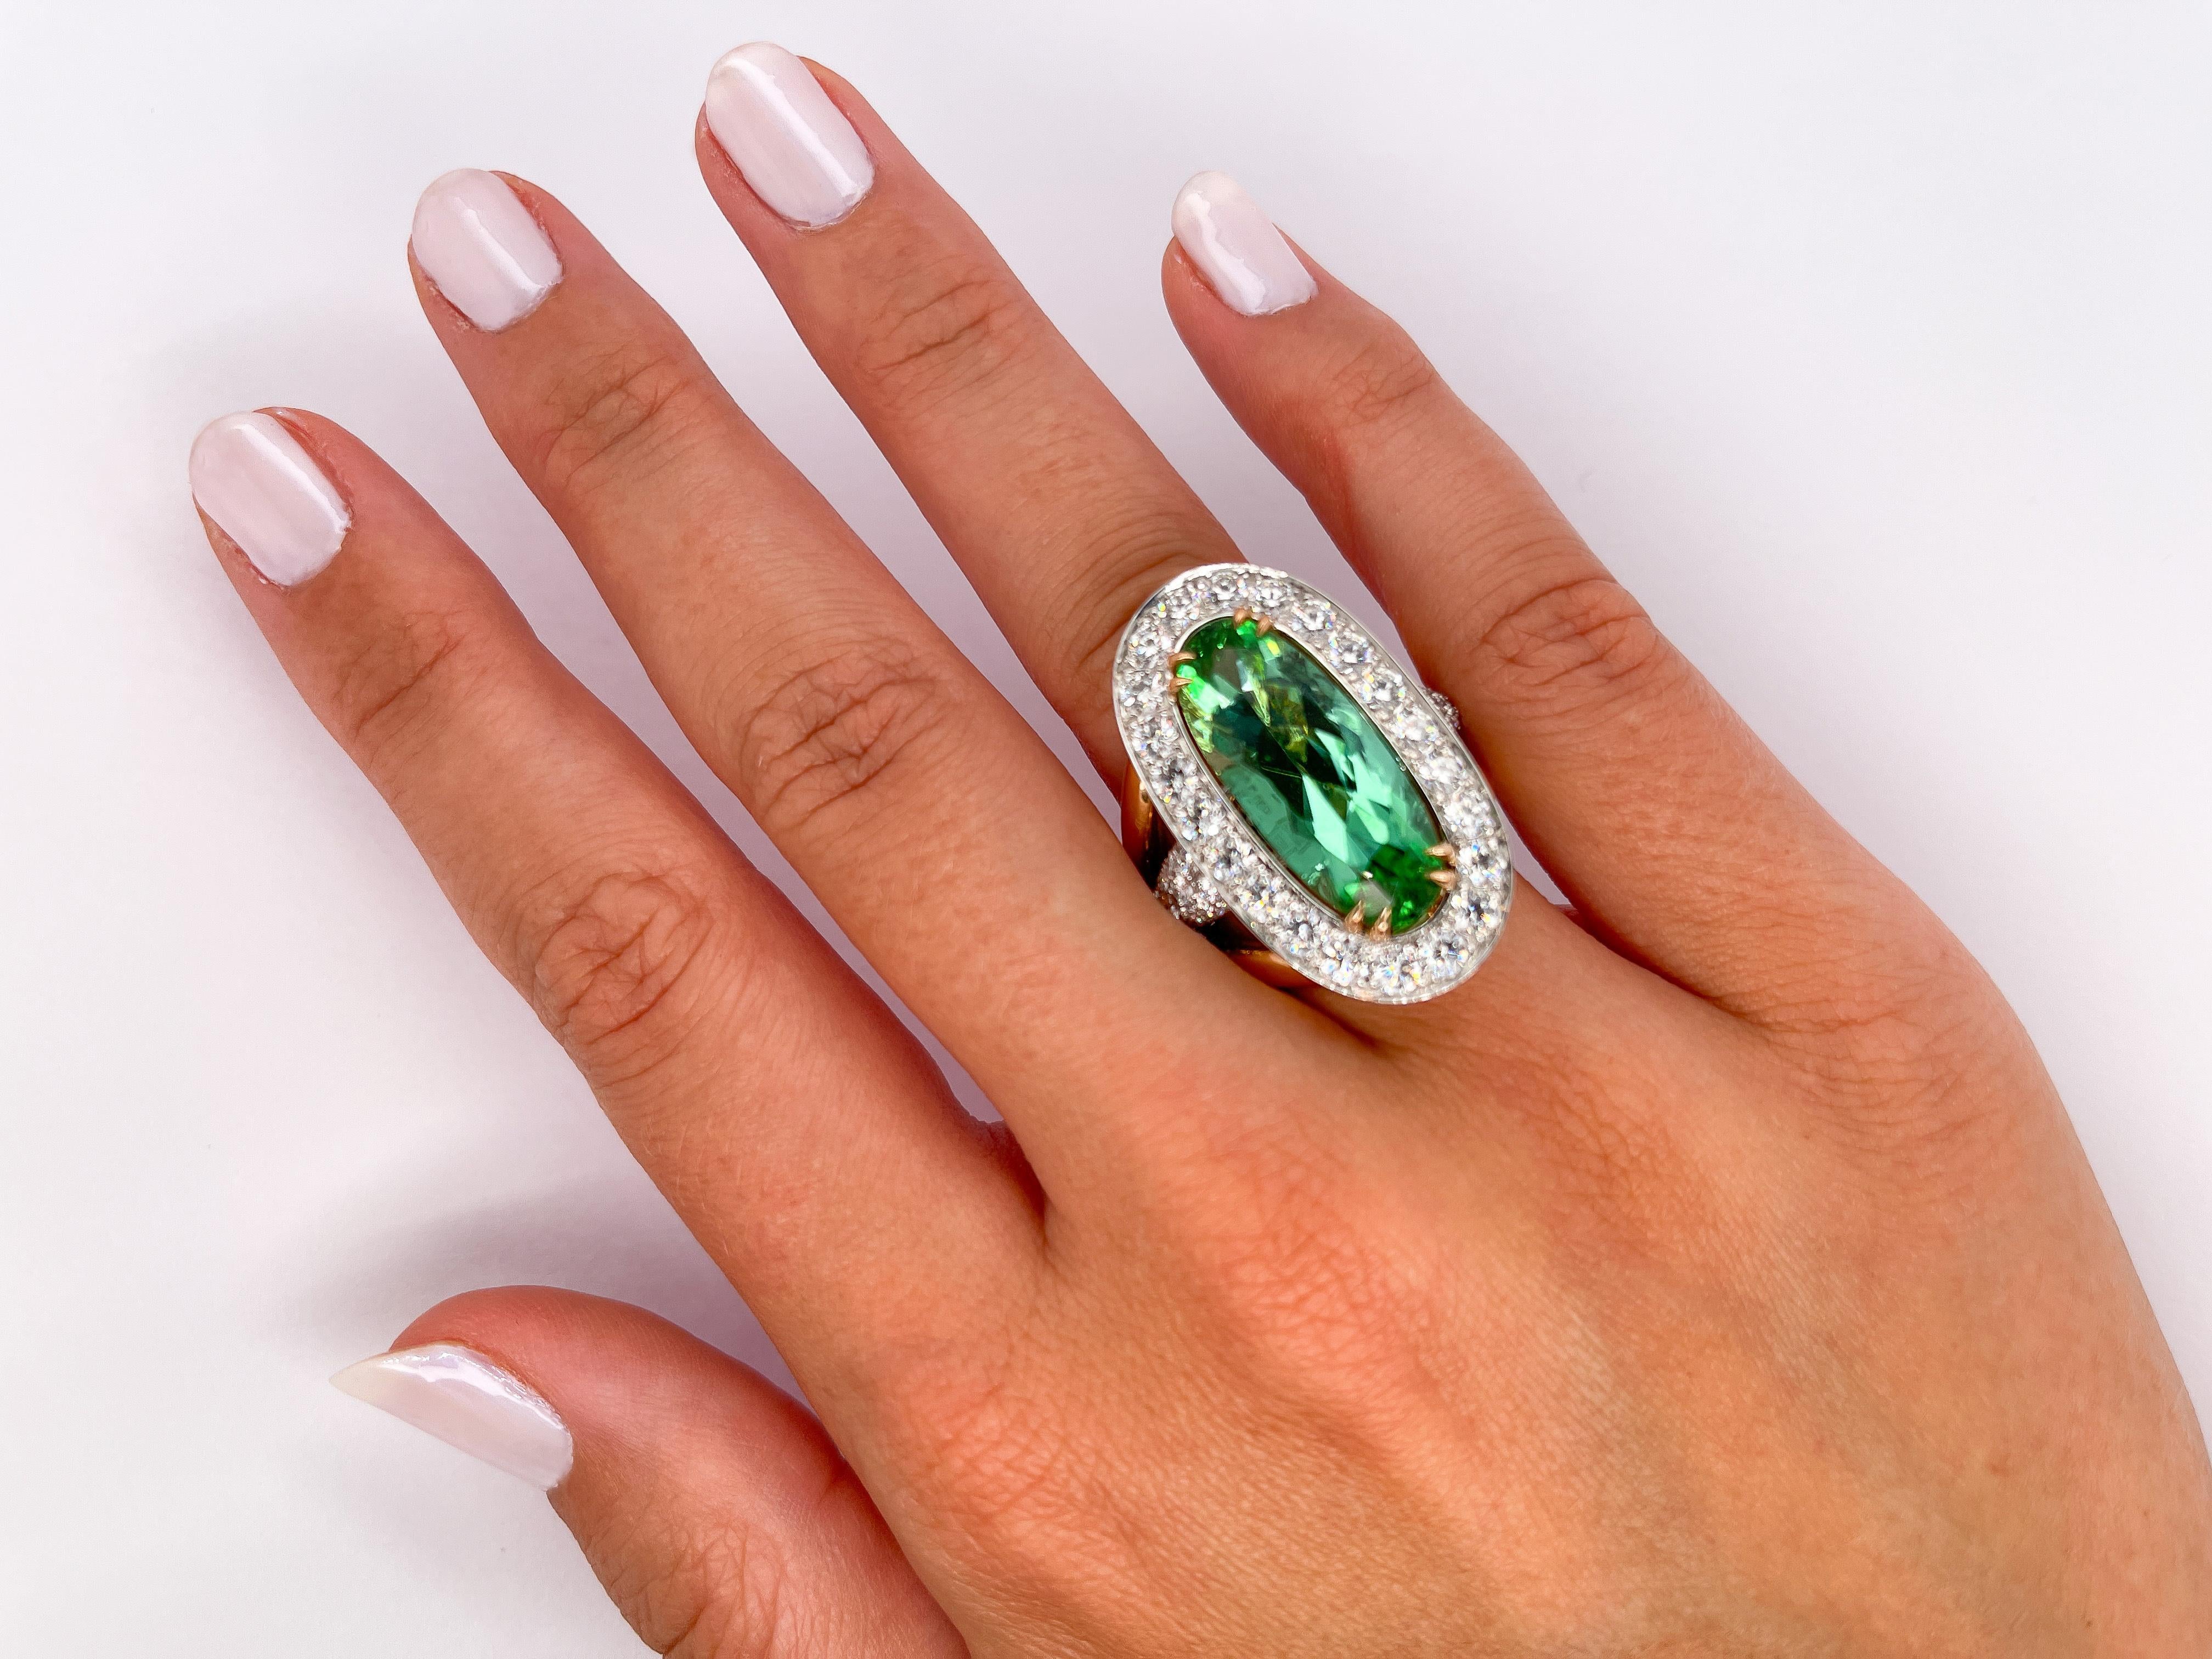 18K White & Yellow Gold 10.37 Carat Mint Tourmaline Cocktail Ring by Jochen Leën In New Condition For Sale In Antwerp, BE